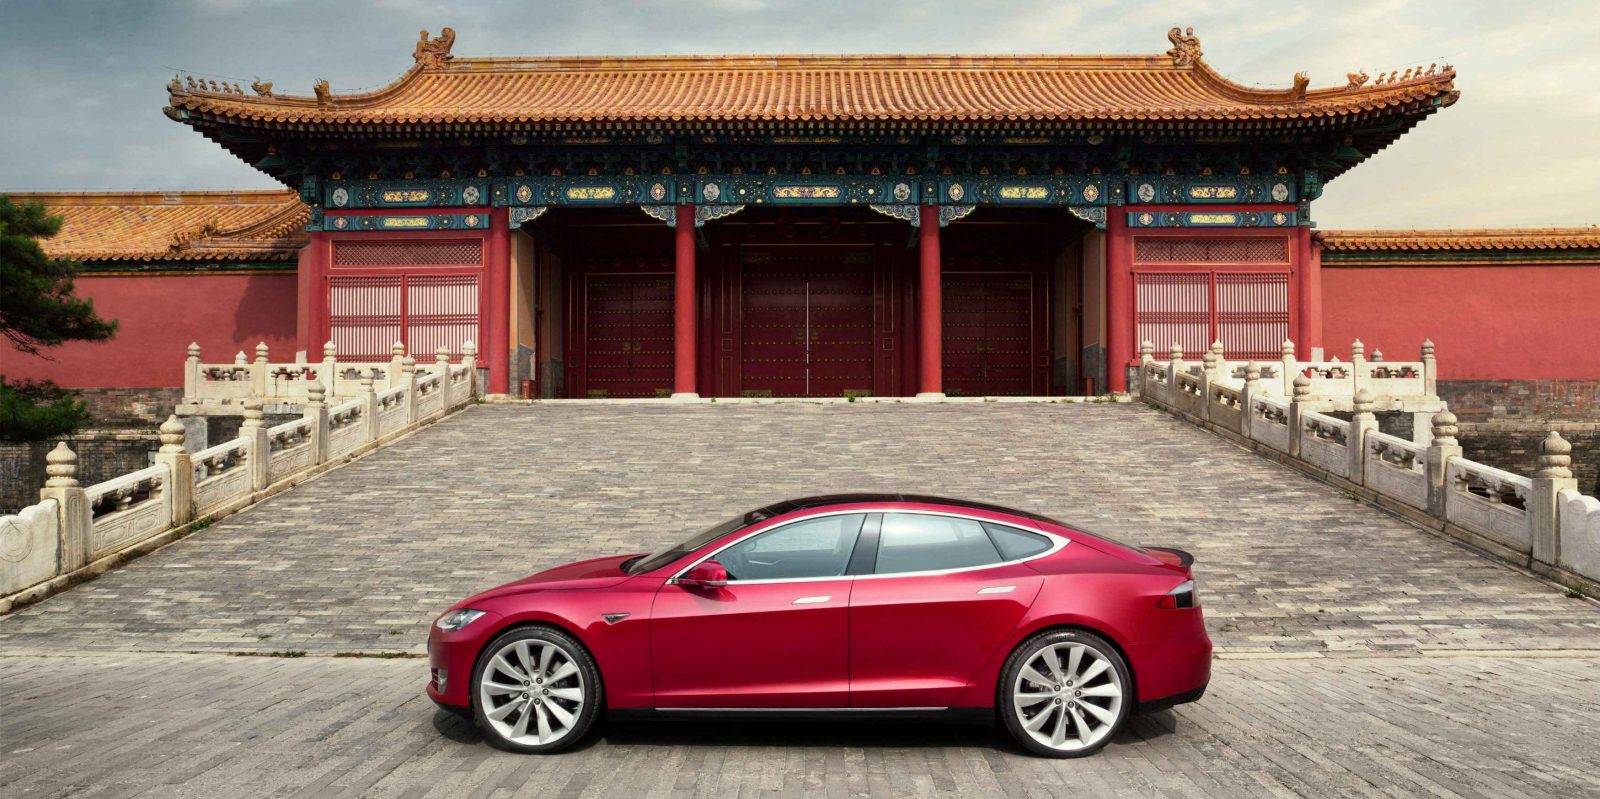 Tesla Giga Shanghai’s Model 3 Will Benefit With Gov EV Subsidies Extension Policy